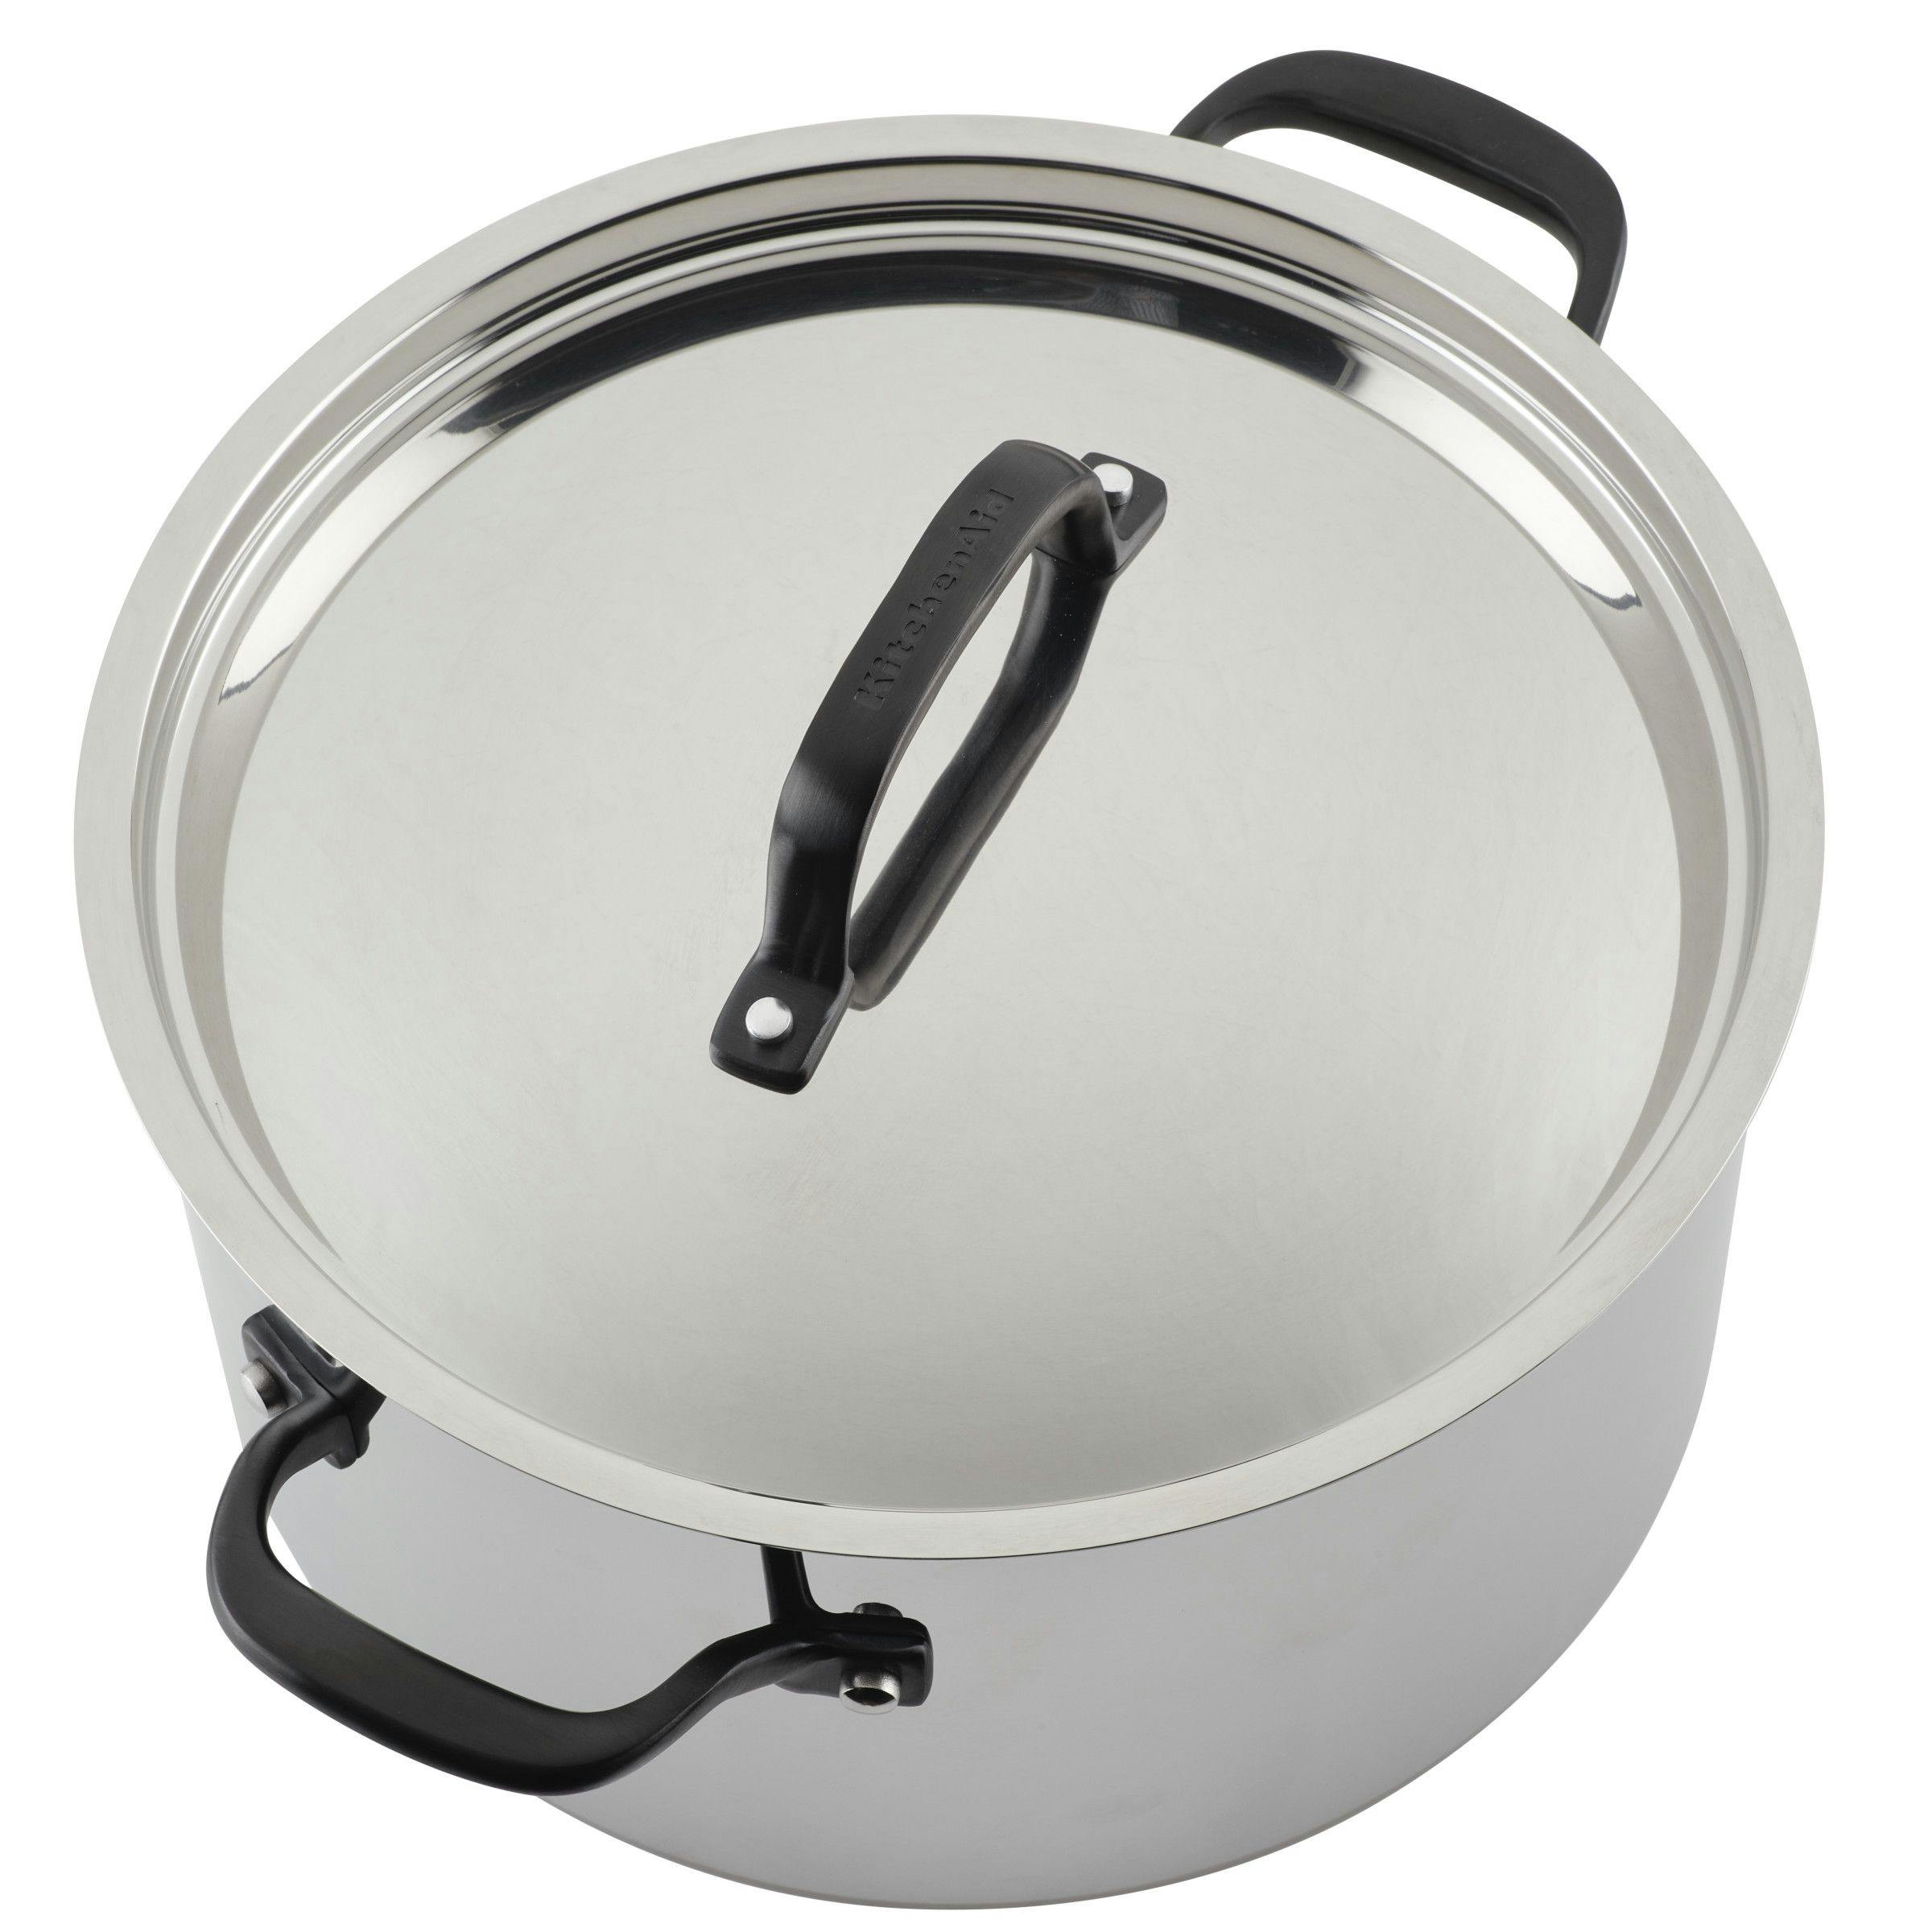 KitchenAid 5-Ply Clad Stainless Steel Stockpot with Lid, 8-Quart, Polished Stainless Steel